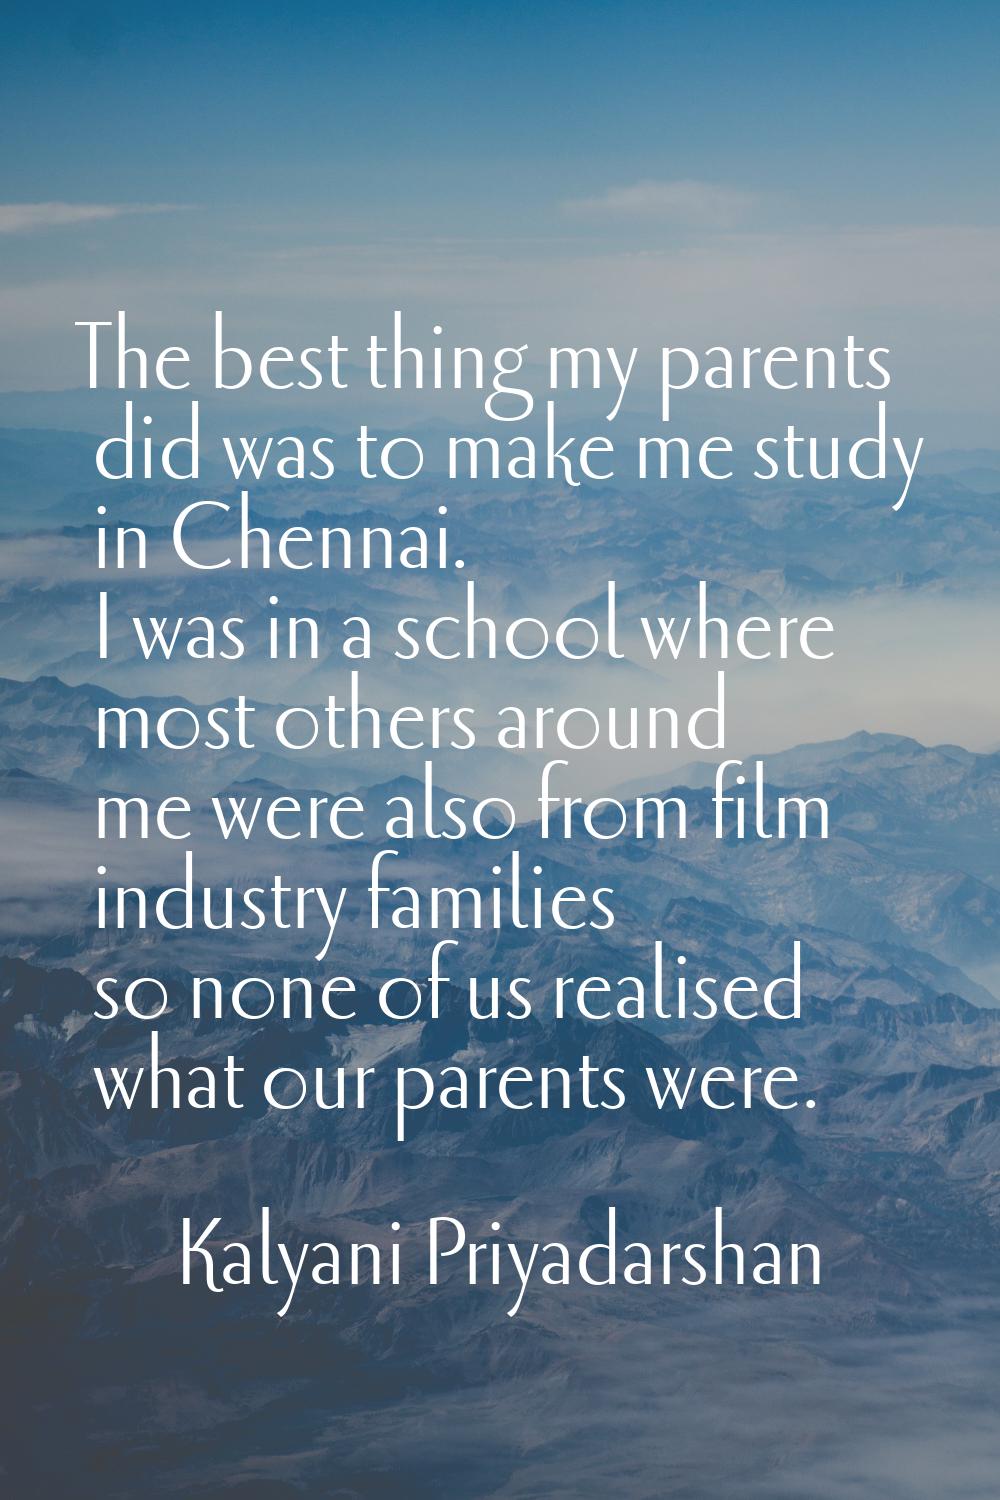 The best thing my parents did was to make me study in Chennai. I was in a school where most others 